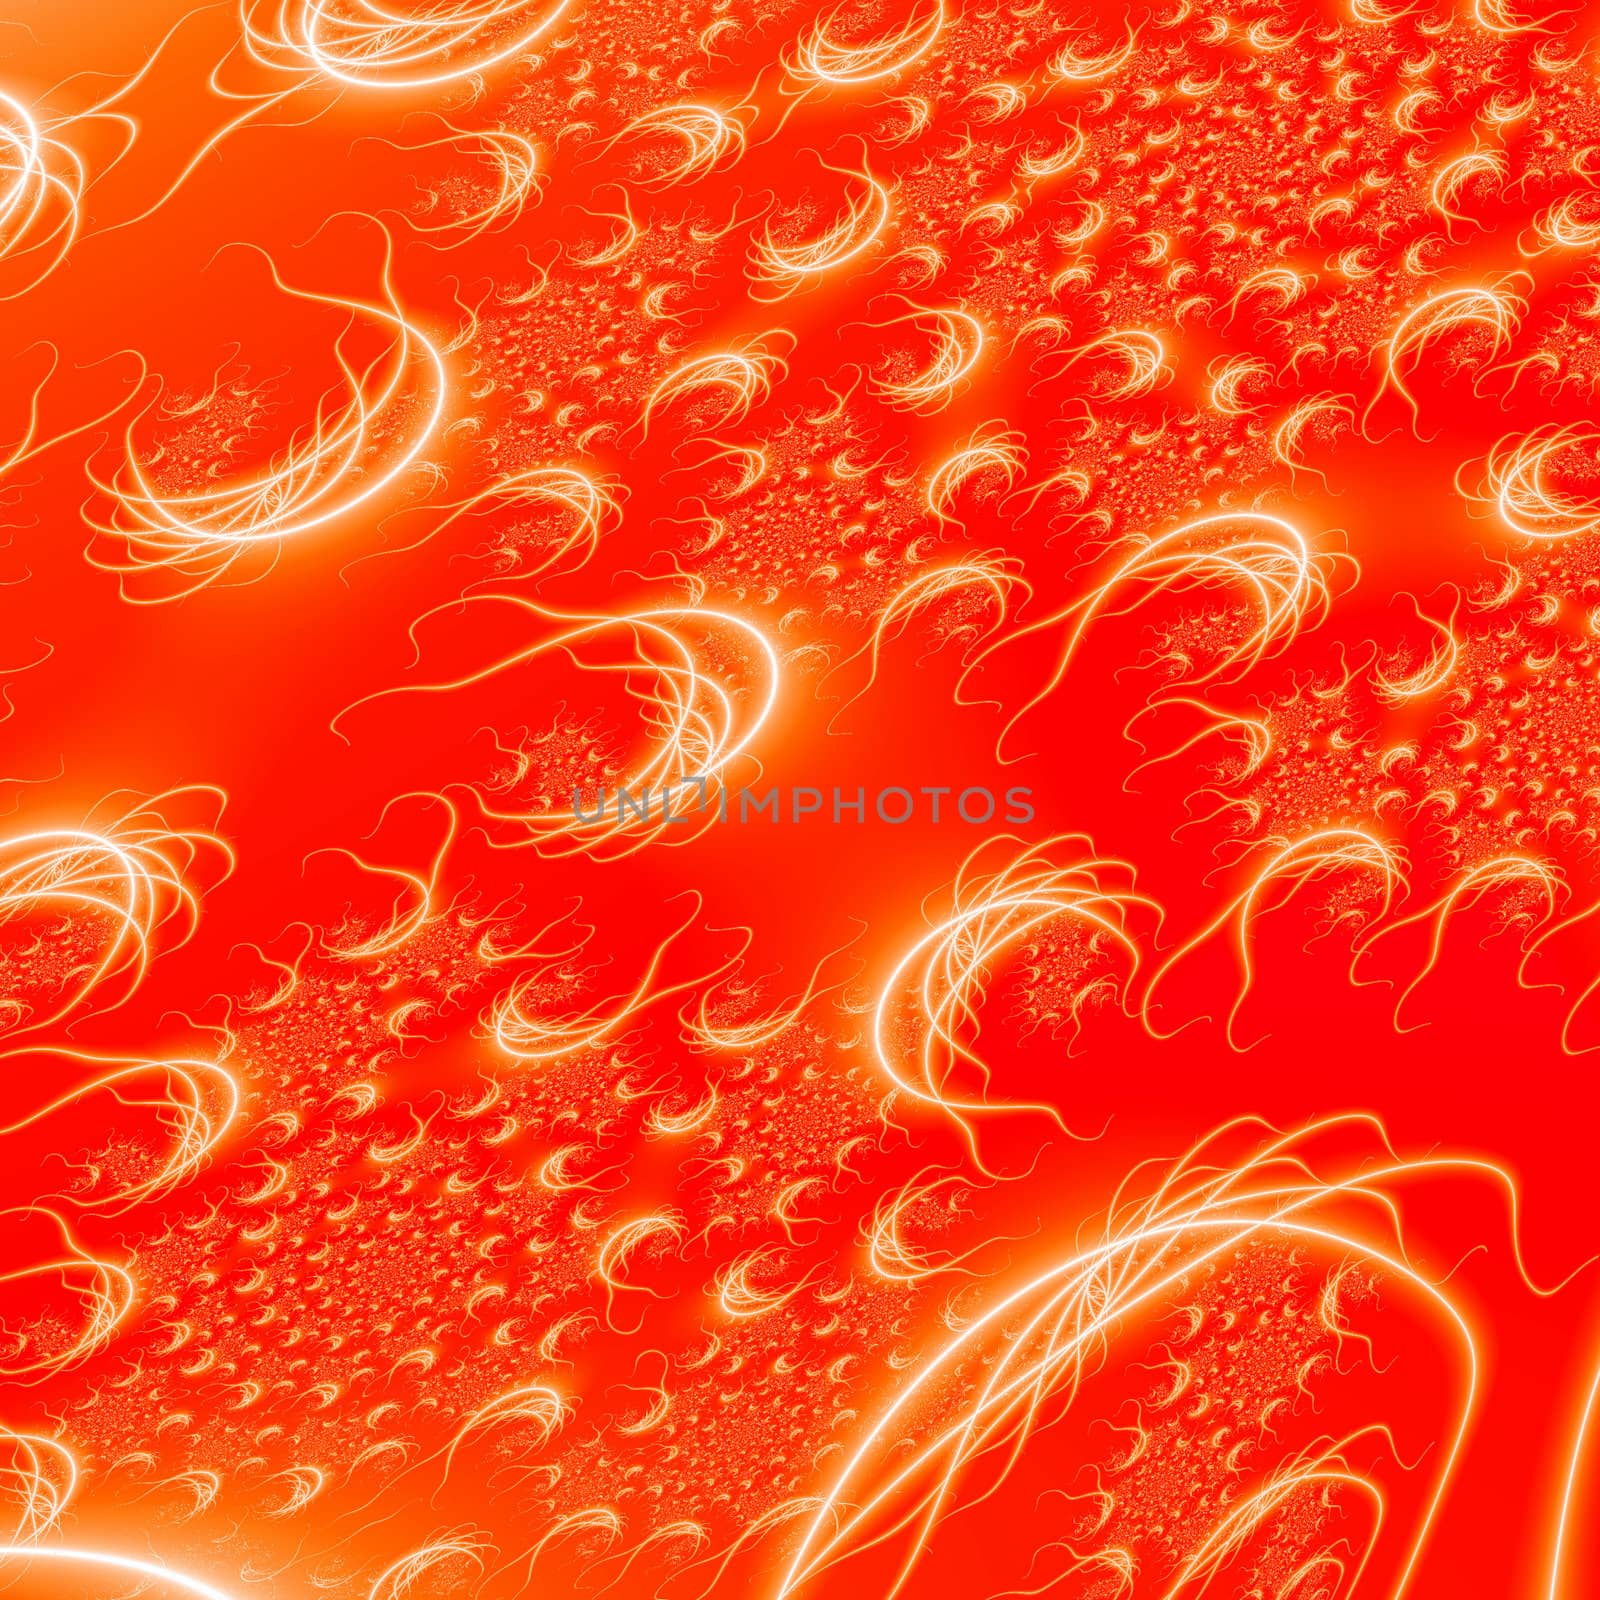 Abstract red fractal background illustration